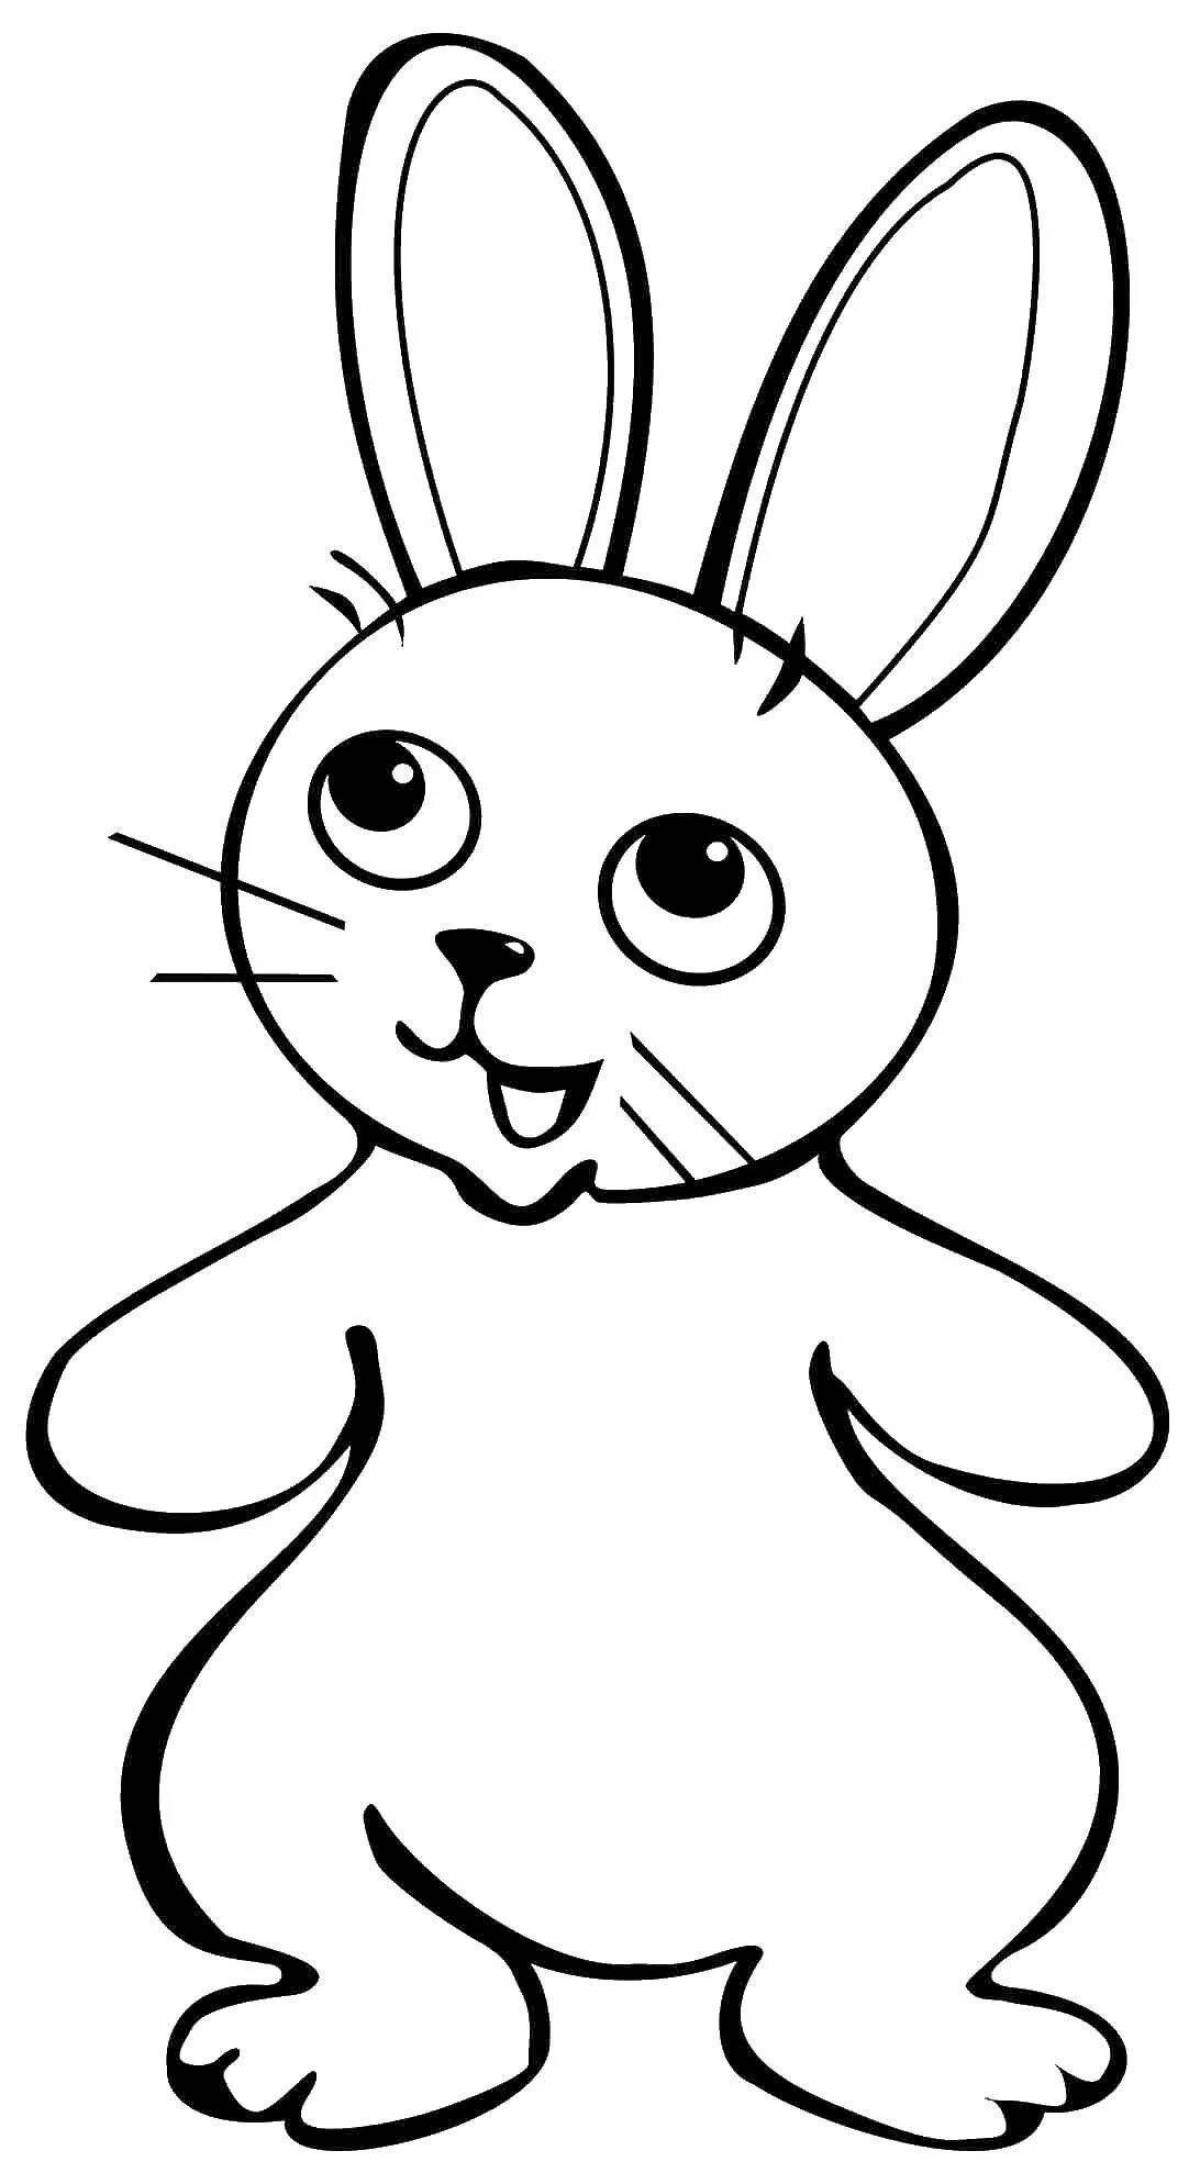 Shine coloring page hare outline